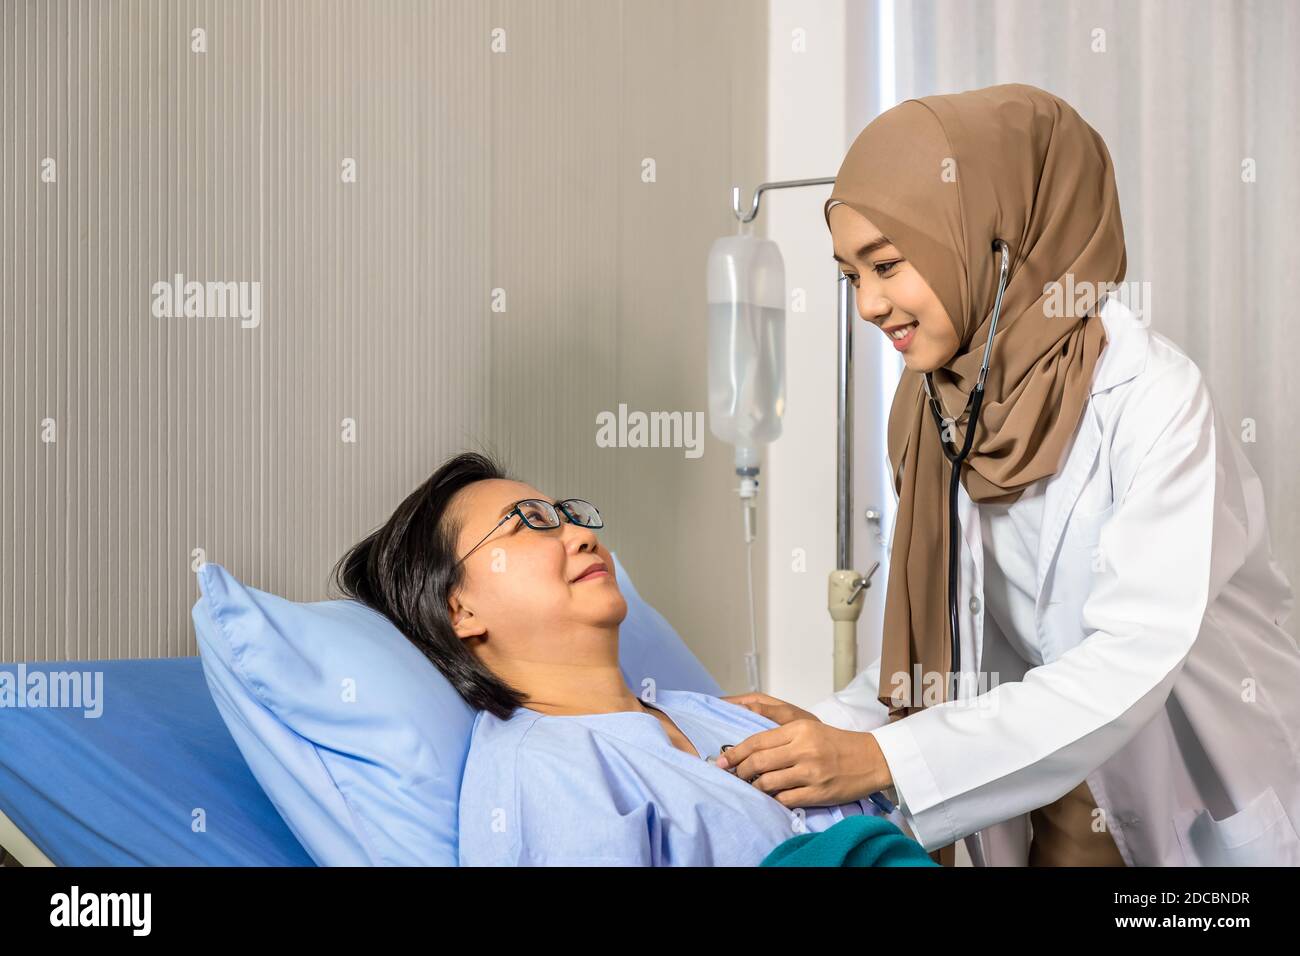 Muslim female woman medical doctor using stethoscope to listen to heartbeat, patient lying on bed Stock Photo